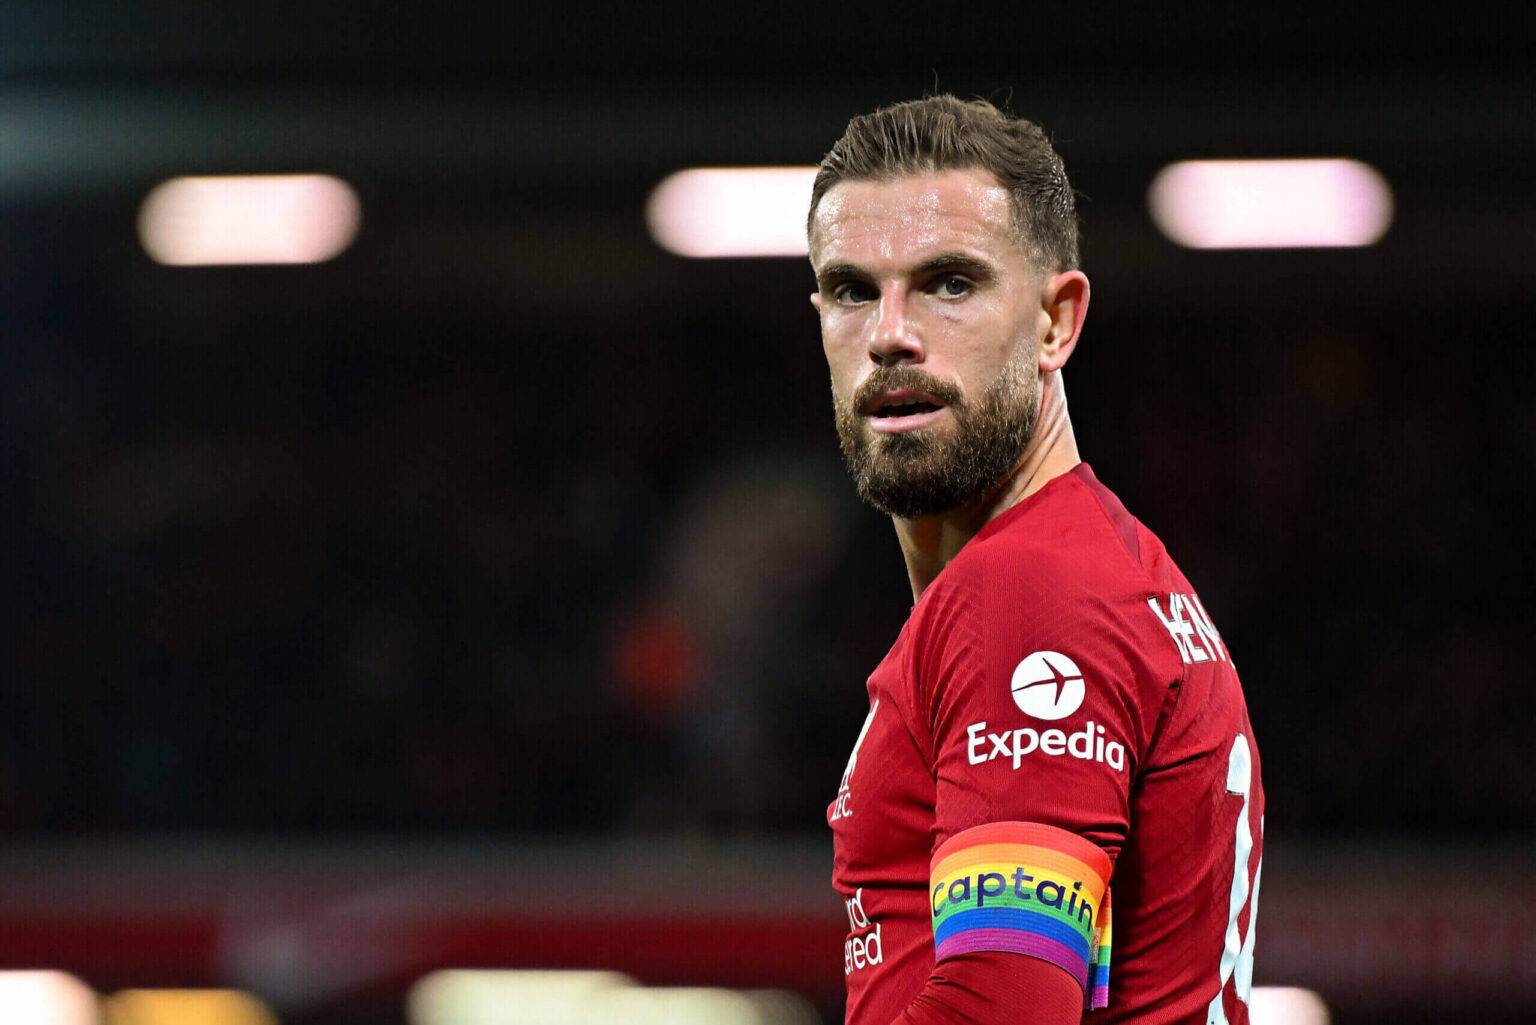 Jordan Henderson: I wouldn’t disrespect Saudi Arabia religion and culture by wearing Rainbow Laces